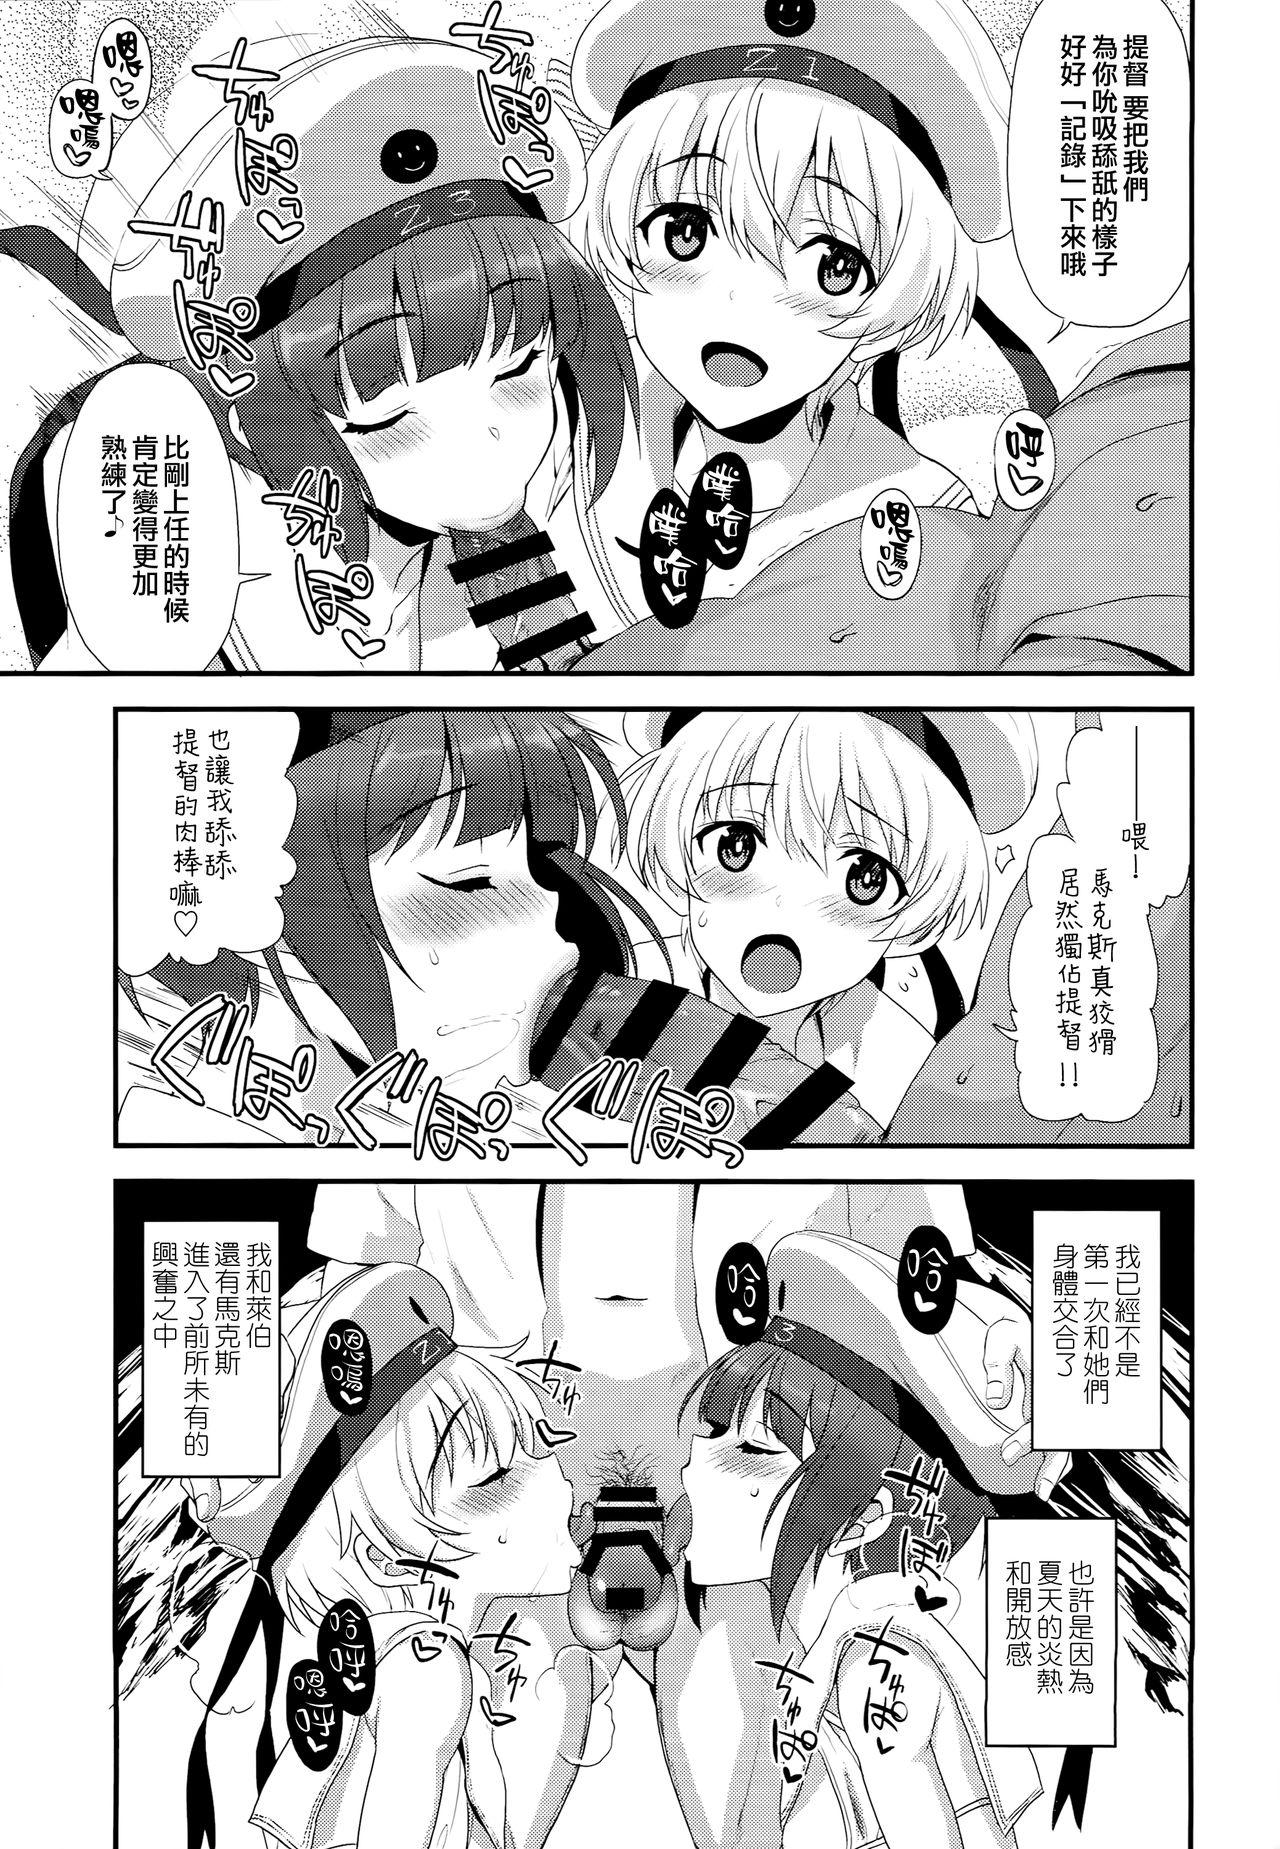 Hot Milf Apfelschorle - Kantai collection Domination - Page 7